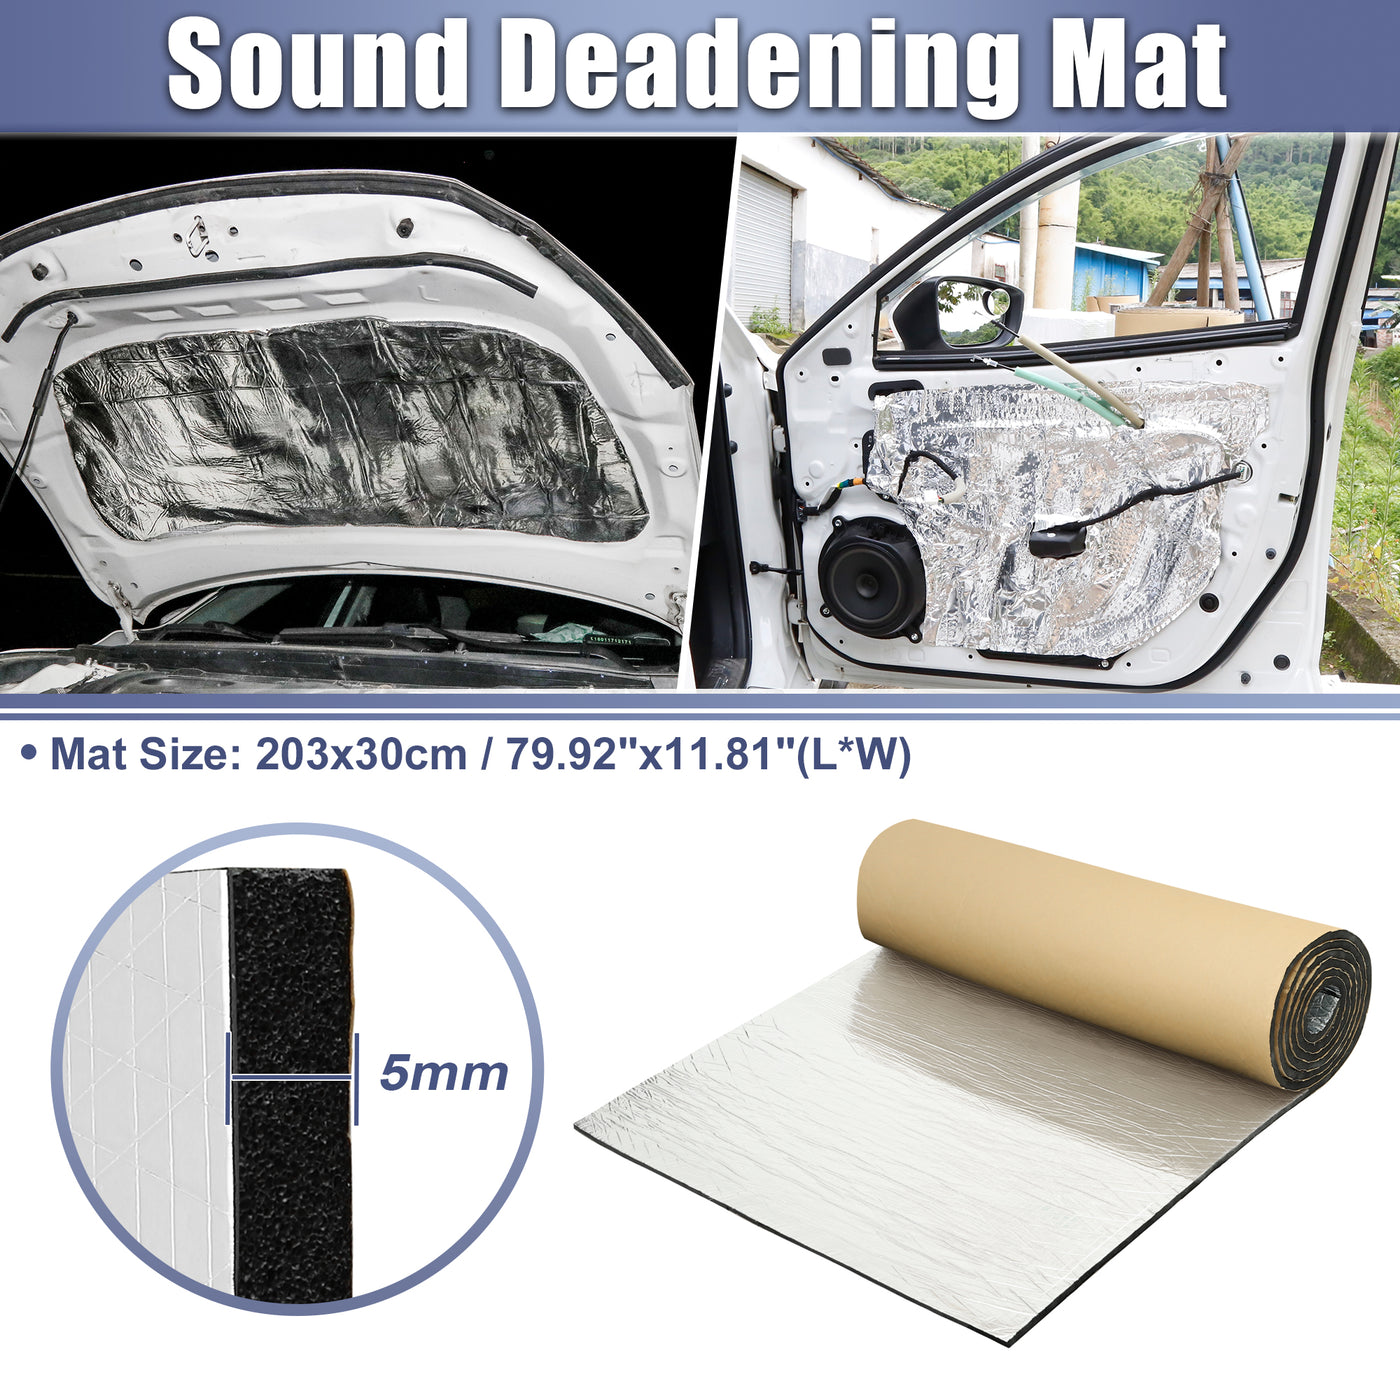 X AUTOHAUX 197mil 5mm 6.55sqft Car Sound Deadening Mat Aluminum Foil Closed Cell Foam Heat Shield Material Damping Self Adhesive Universal for Hood Fender and Boat Engine Cover 79.92"x11.81"